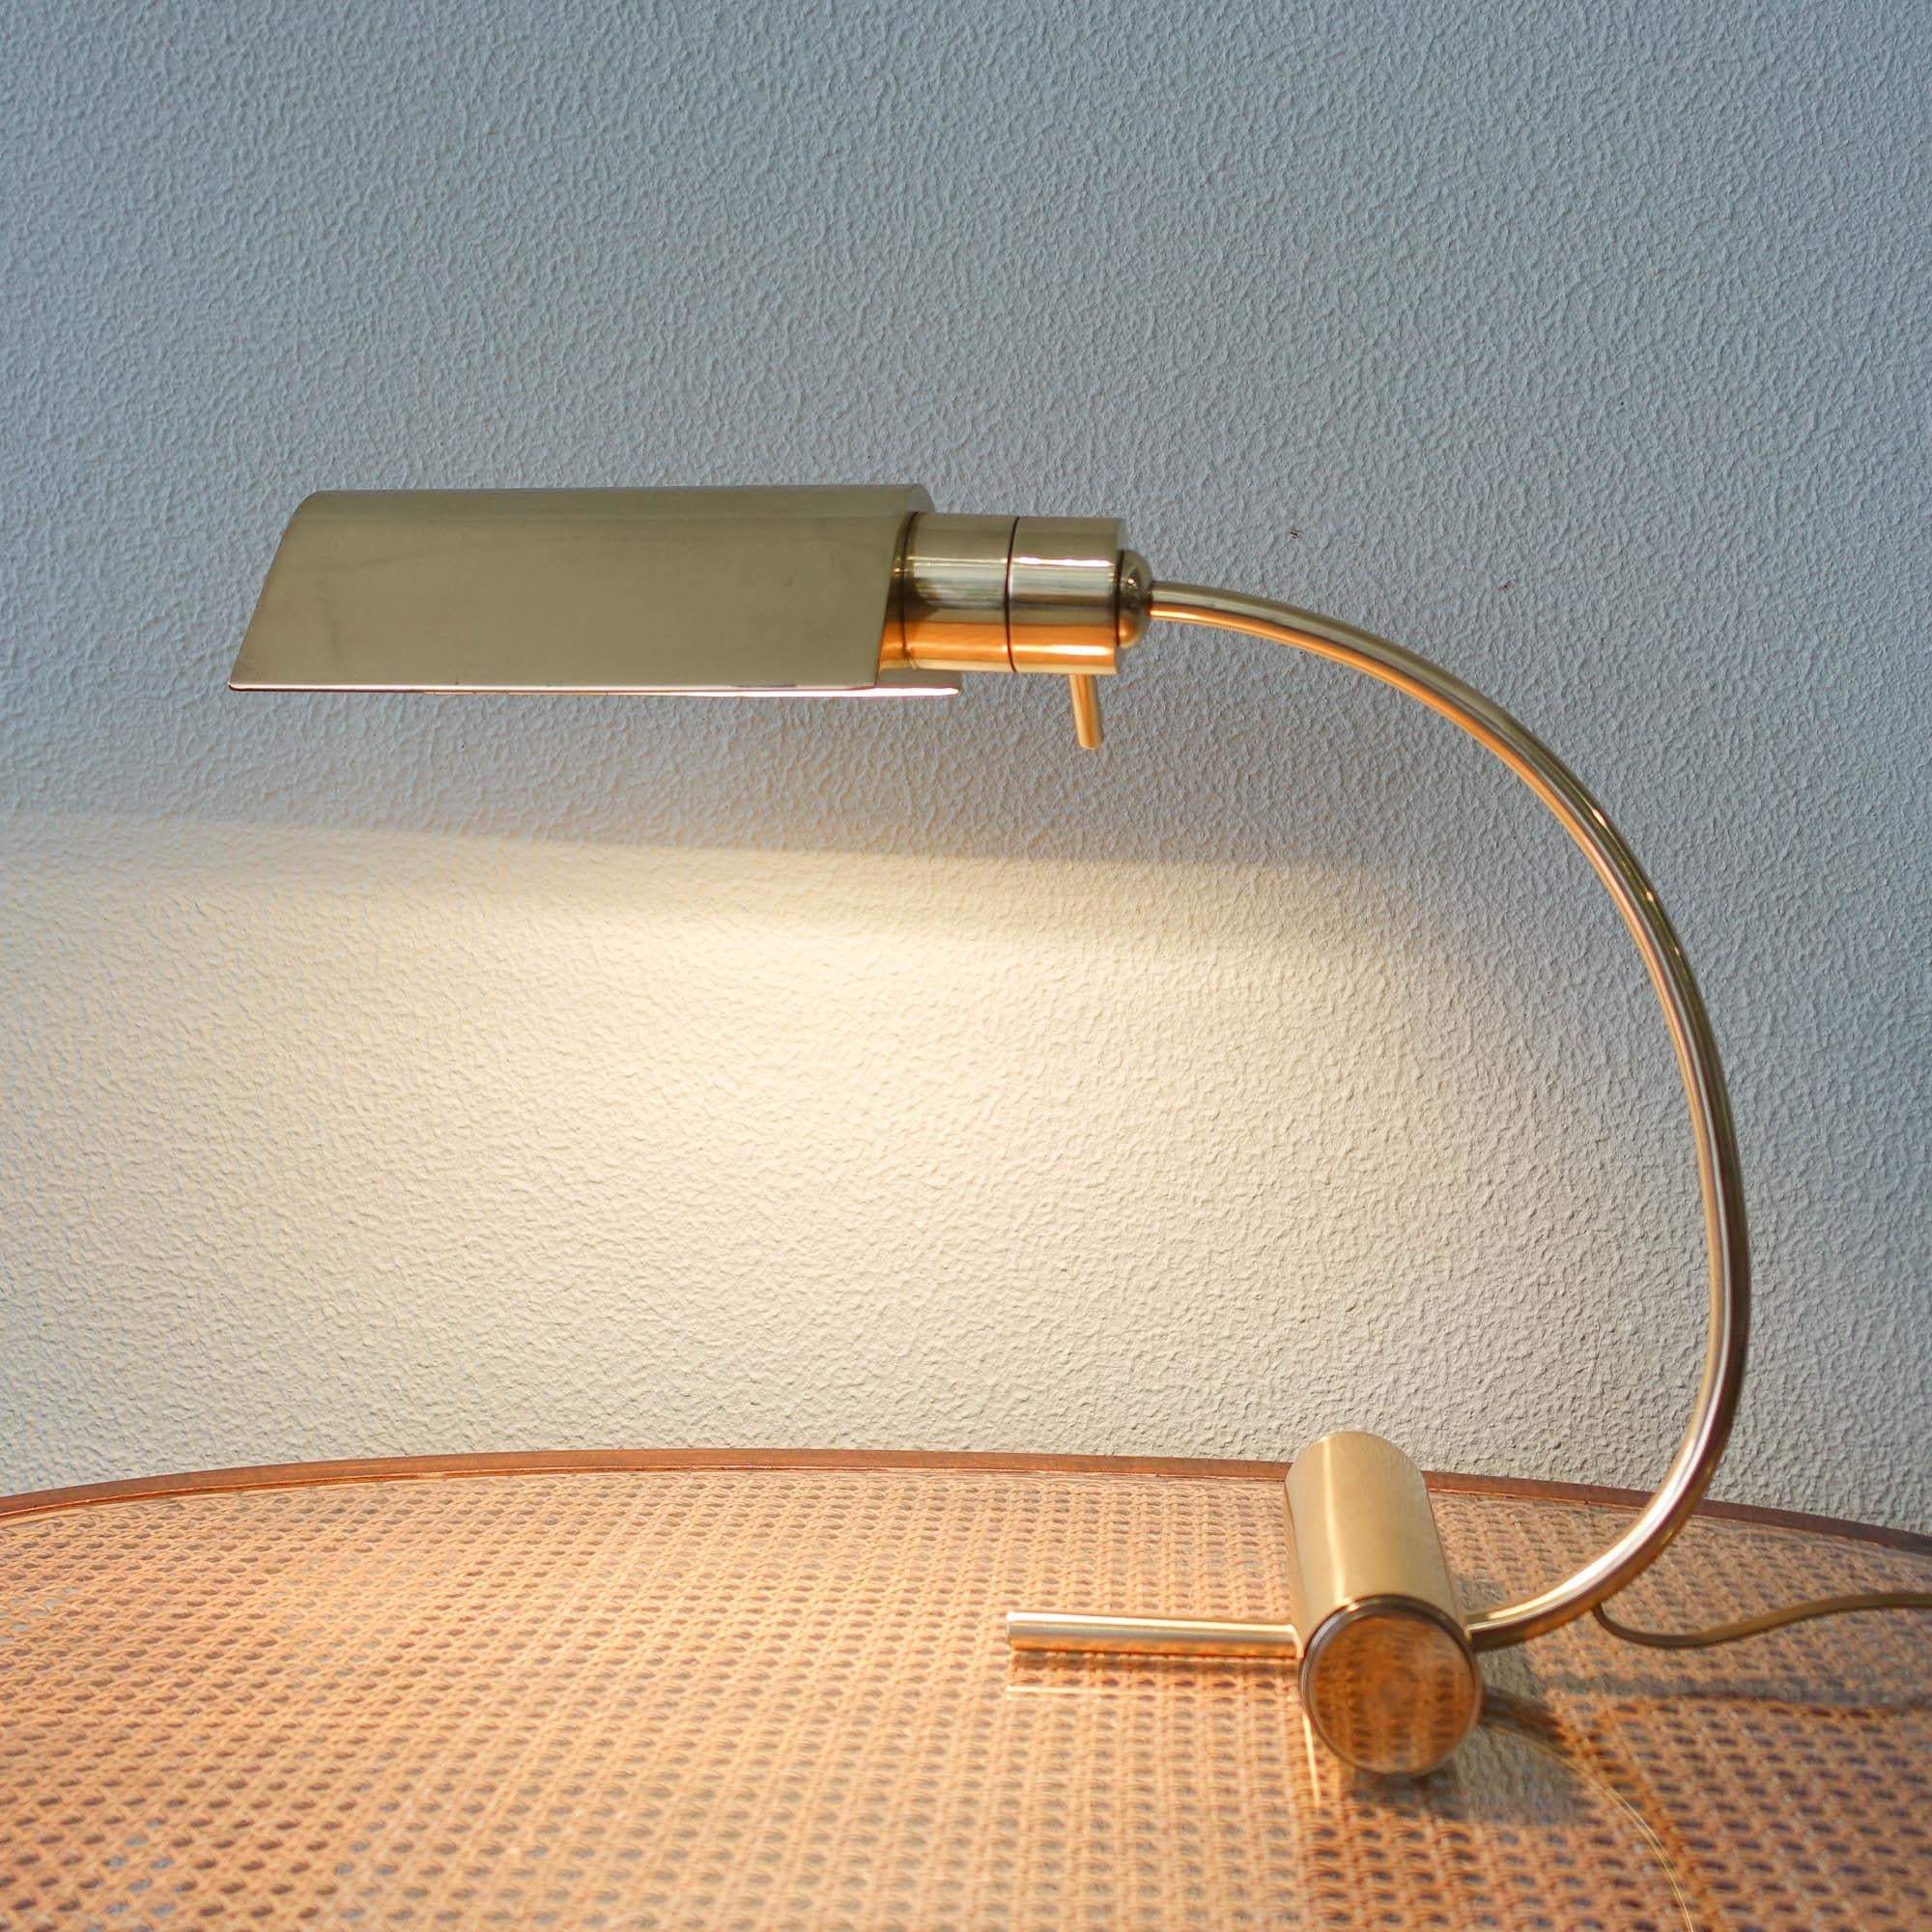 This table lamp was designed and produced by Boulanger in Belgium, during the 1960's. It features a brass cylindrical tubular base were a curved brass rod arm is attached. Finishes with a triangular prism lampshade with some holes that allows the